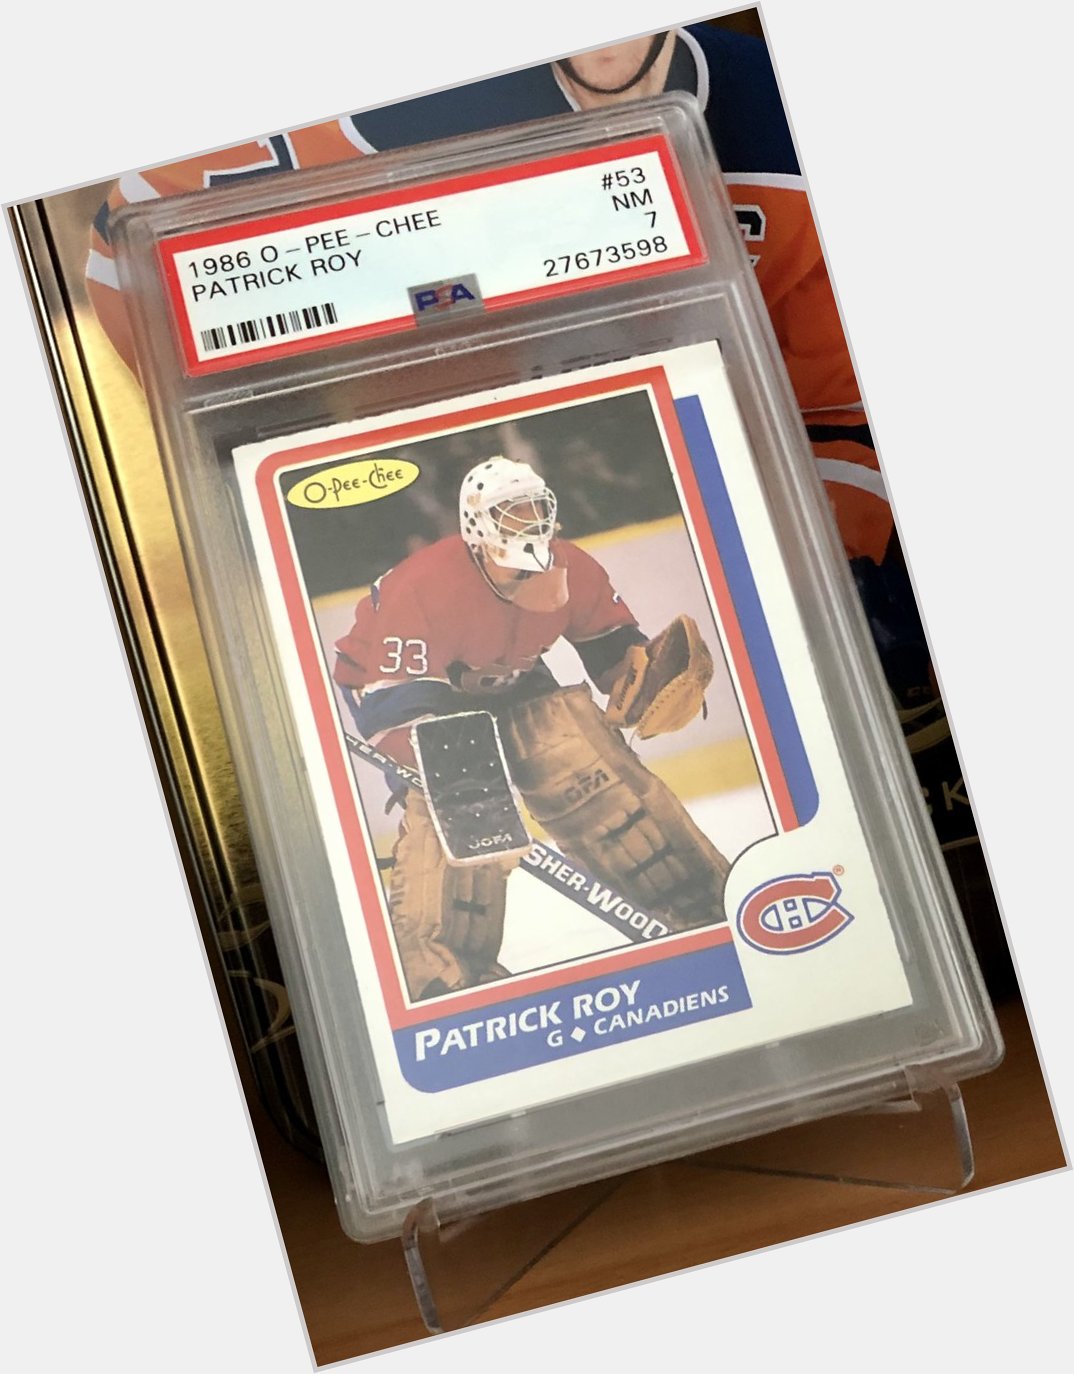 Happy Birthday Patrick Roy - one of the all time greats 